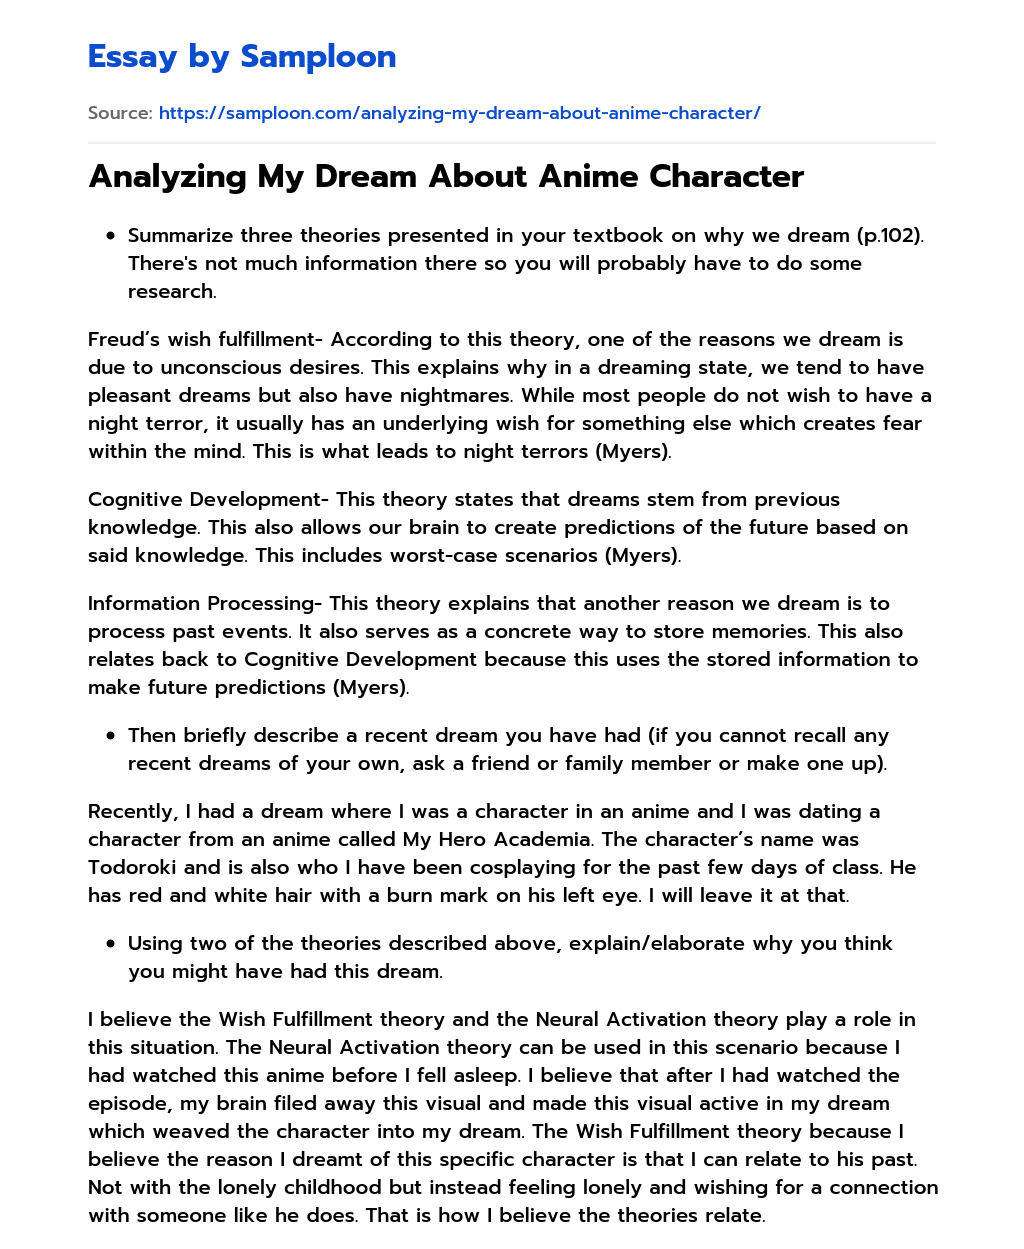 Analyzing My Dream About Anime Character essay